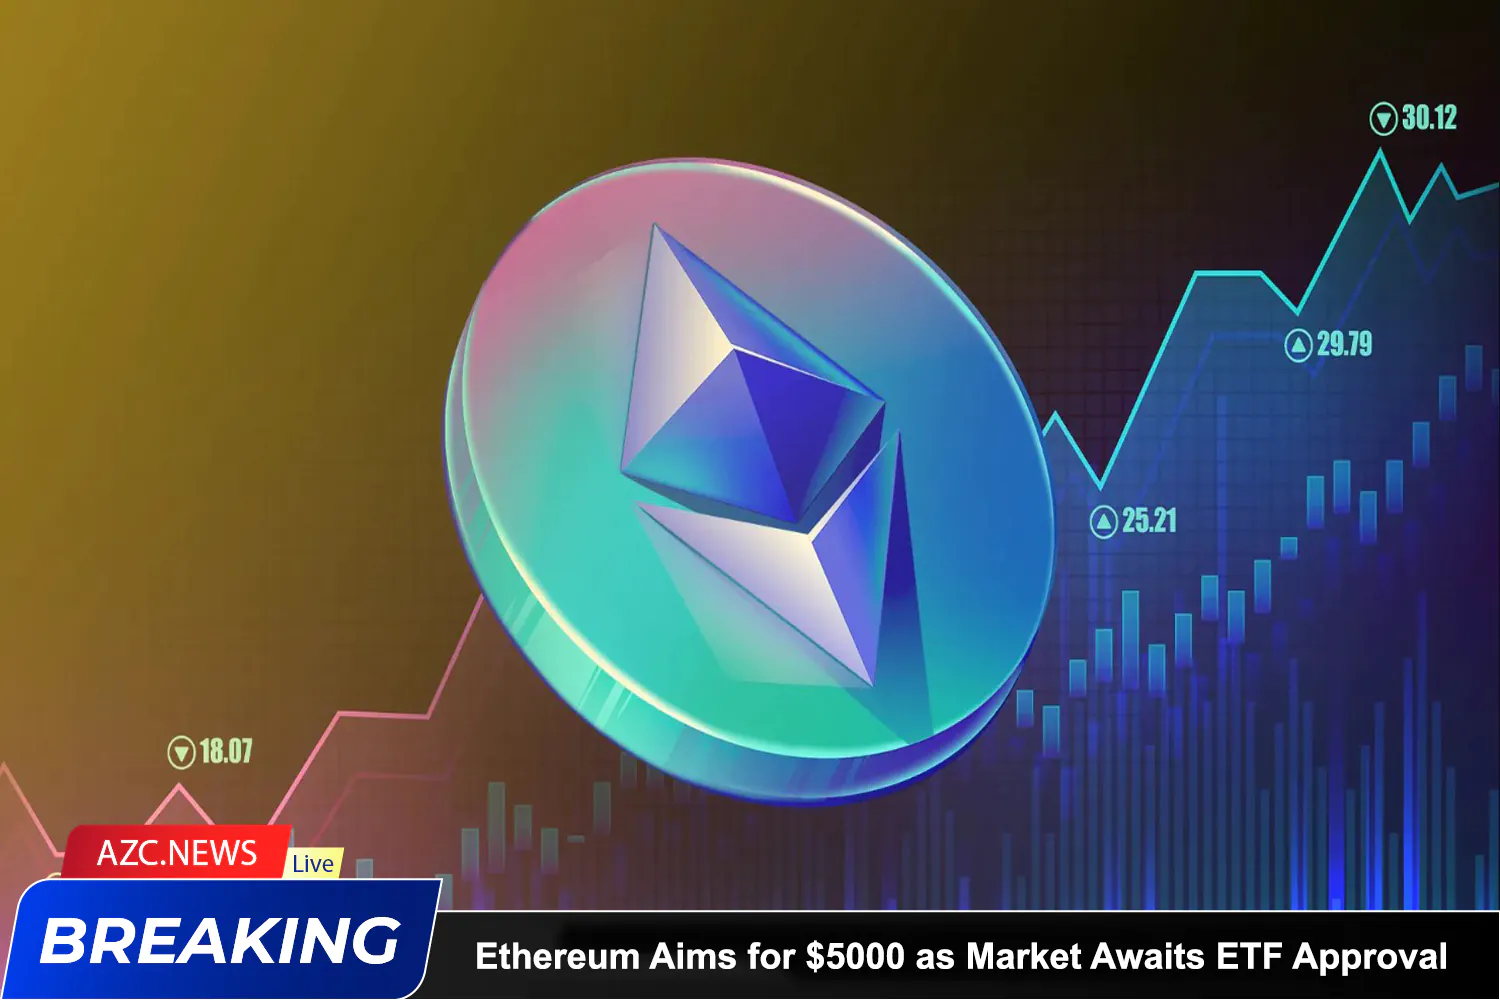 Azcnews Ethereum Aims For $5000 As Market Awaits Etf Approval